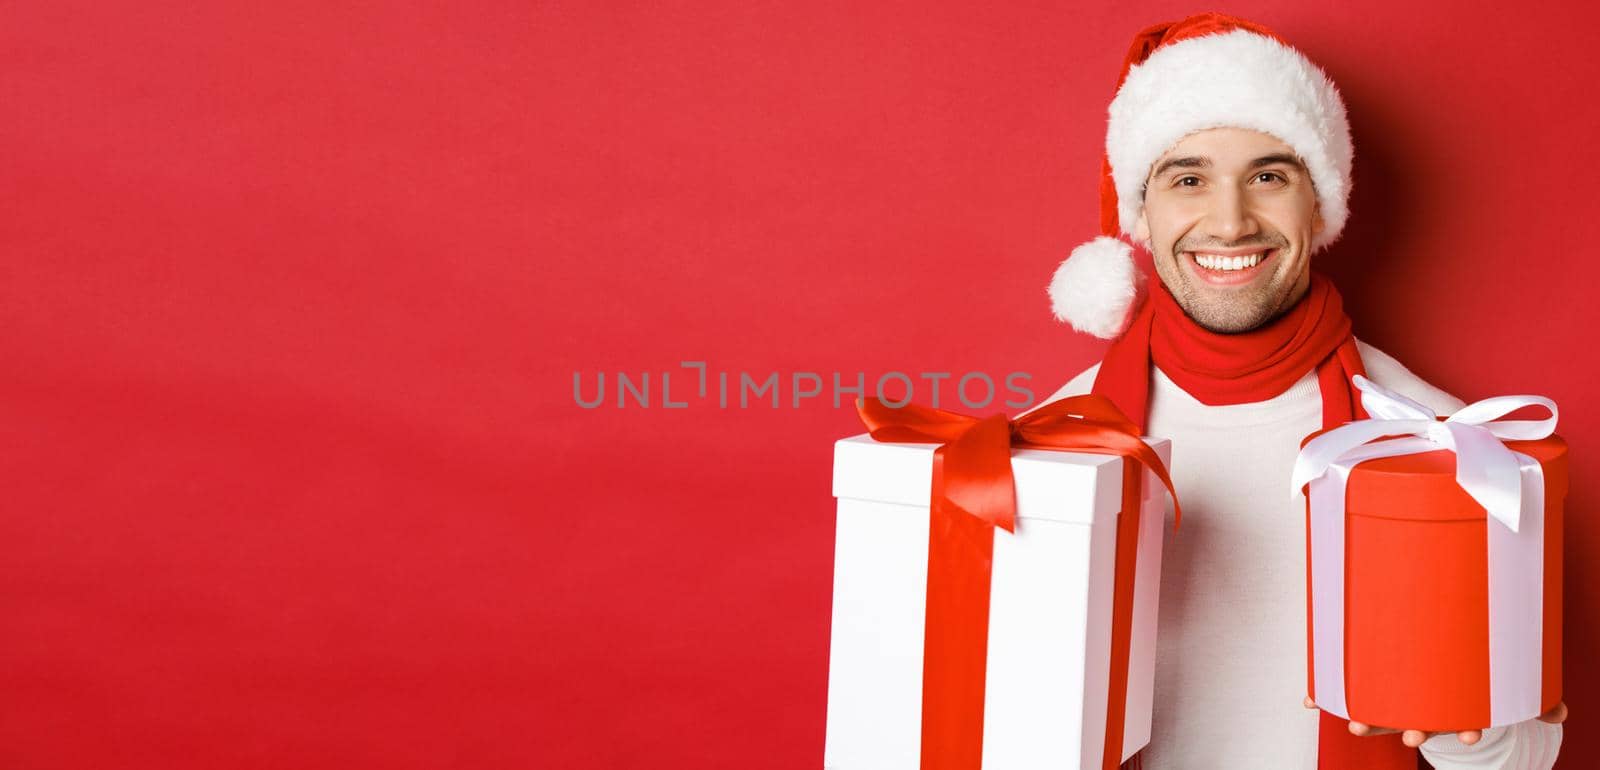 Concept of winter holidays, christmas and lifestyle. Close-up of smiling handsome guy in santa hat and scarf, wishing happy new year and holding gifts, standing with presents over red background.